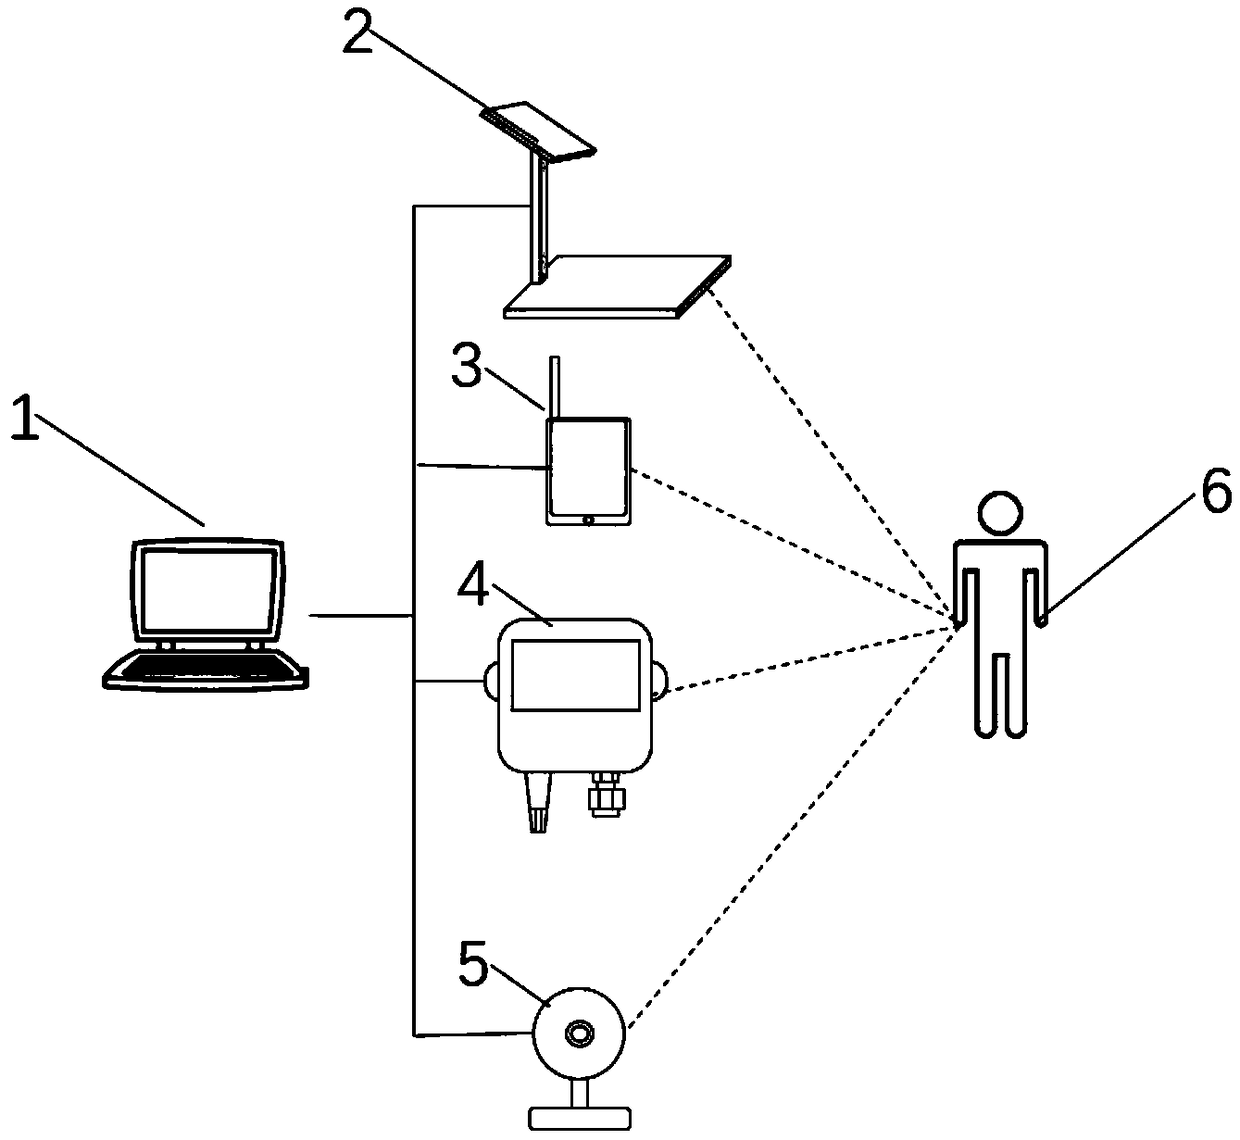 Chicken farm environment management system and method based on Internet